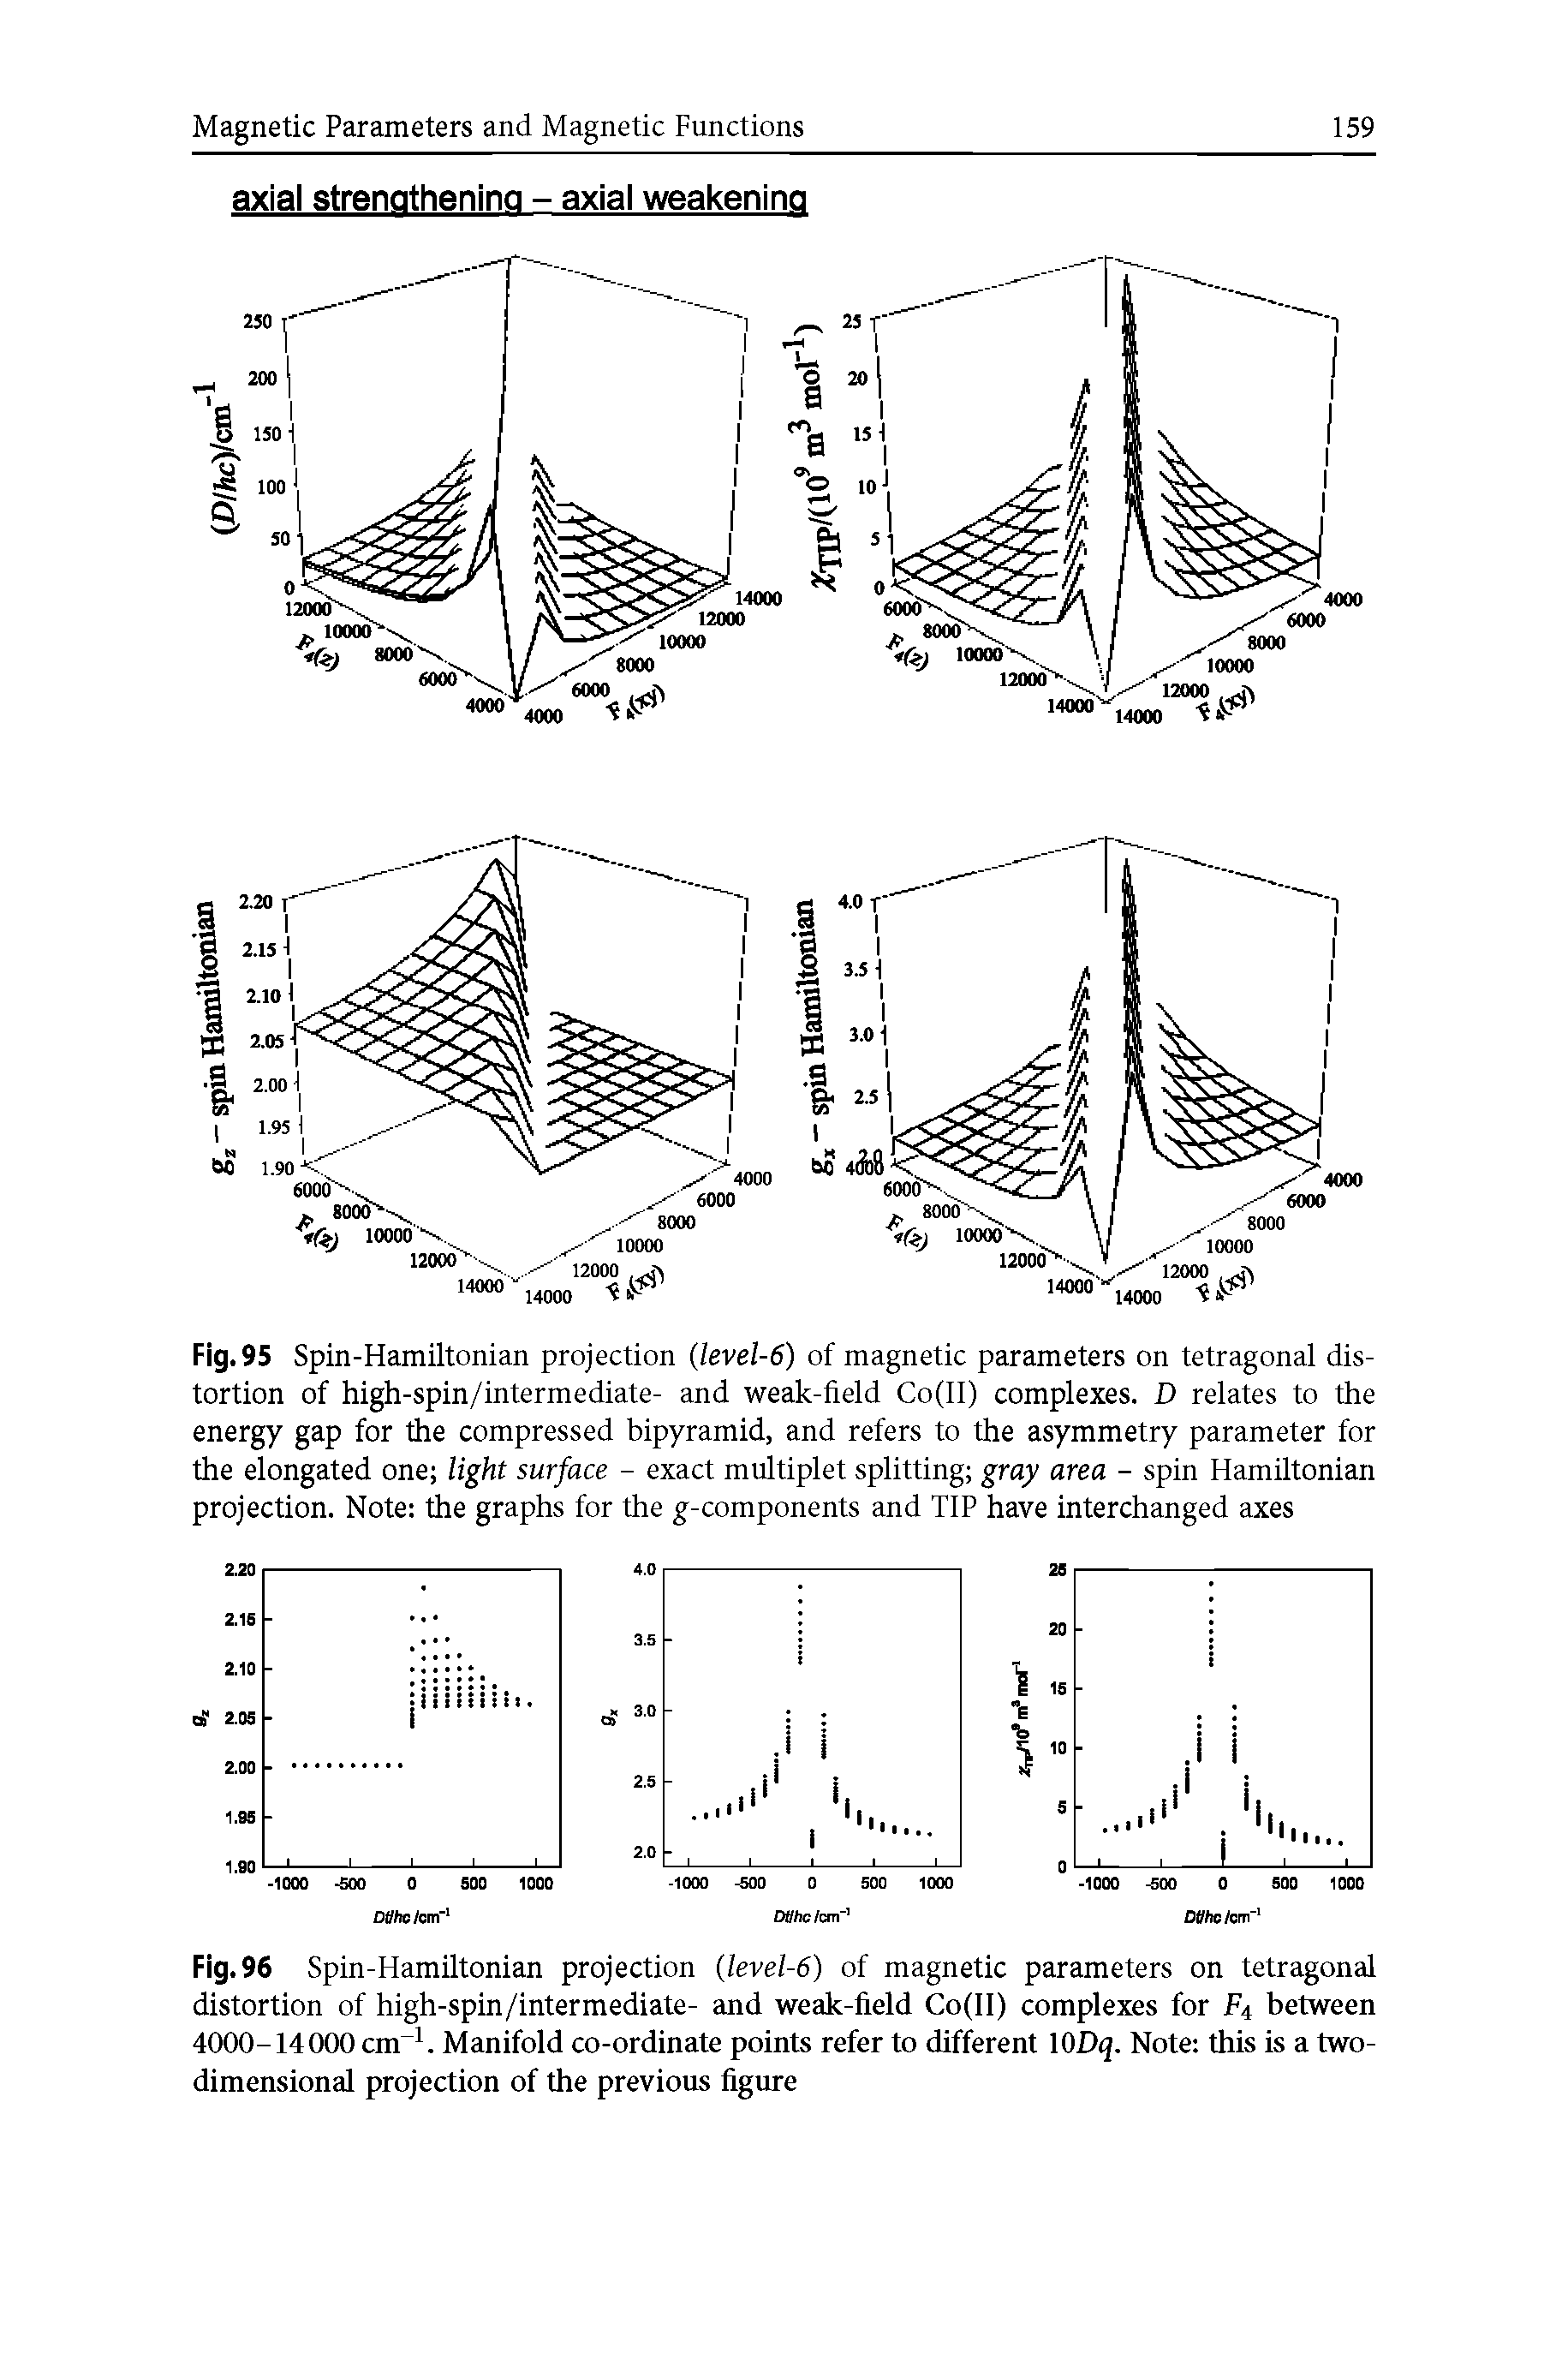 Fig. 95 Spin-Hamiltonian projection (level-6) of magnetic parameters on tetragonal distortion of high-spin/intermediate- and weak-field Co(II) complexes. D relates to the energy gap for the compressed bipyramid, and refers to the asymmetry parameter for the elongated one light surface - exact multiplet splitting gray area - spin Hamiltonian projection. Note the graphs for the g-components and TIP have interchanged axes...